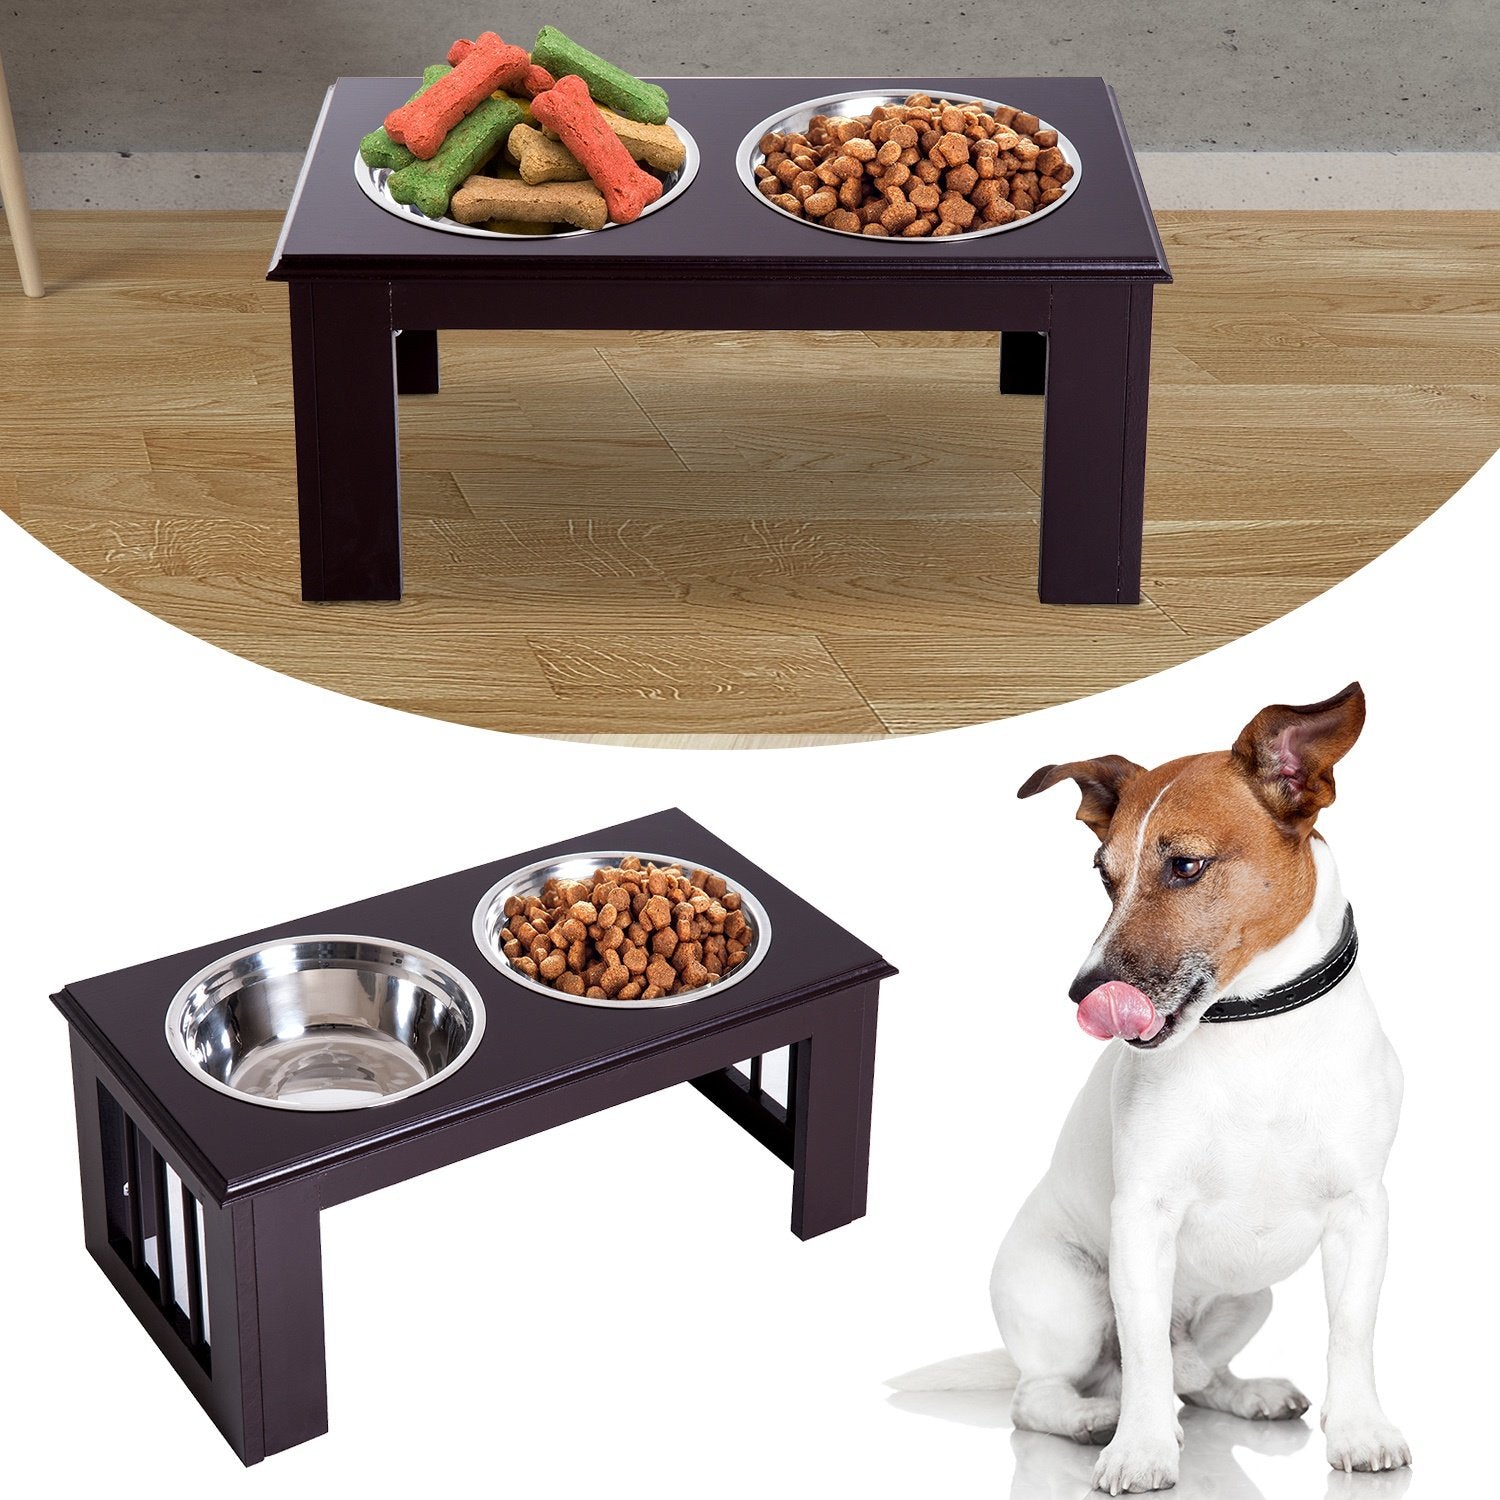 Pawhut Stainless Steel Pet Feeder, 58.4Lx30.5Wx25.4H cm-Brown - Inspirely